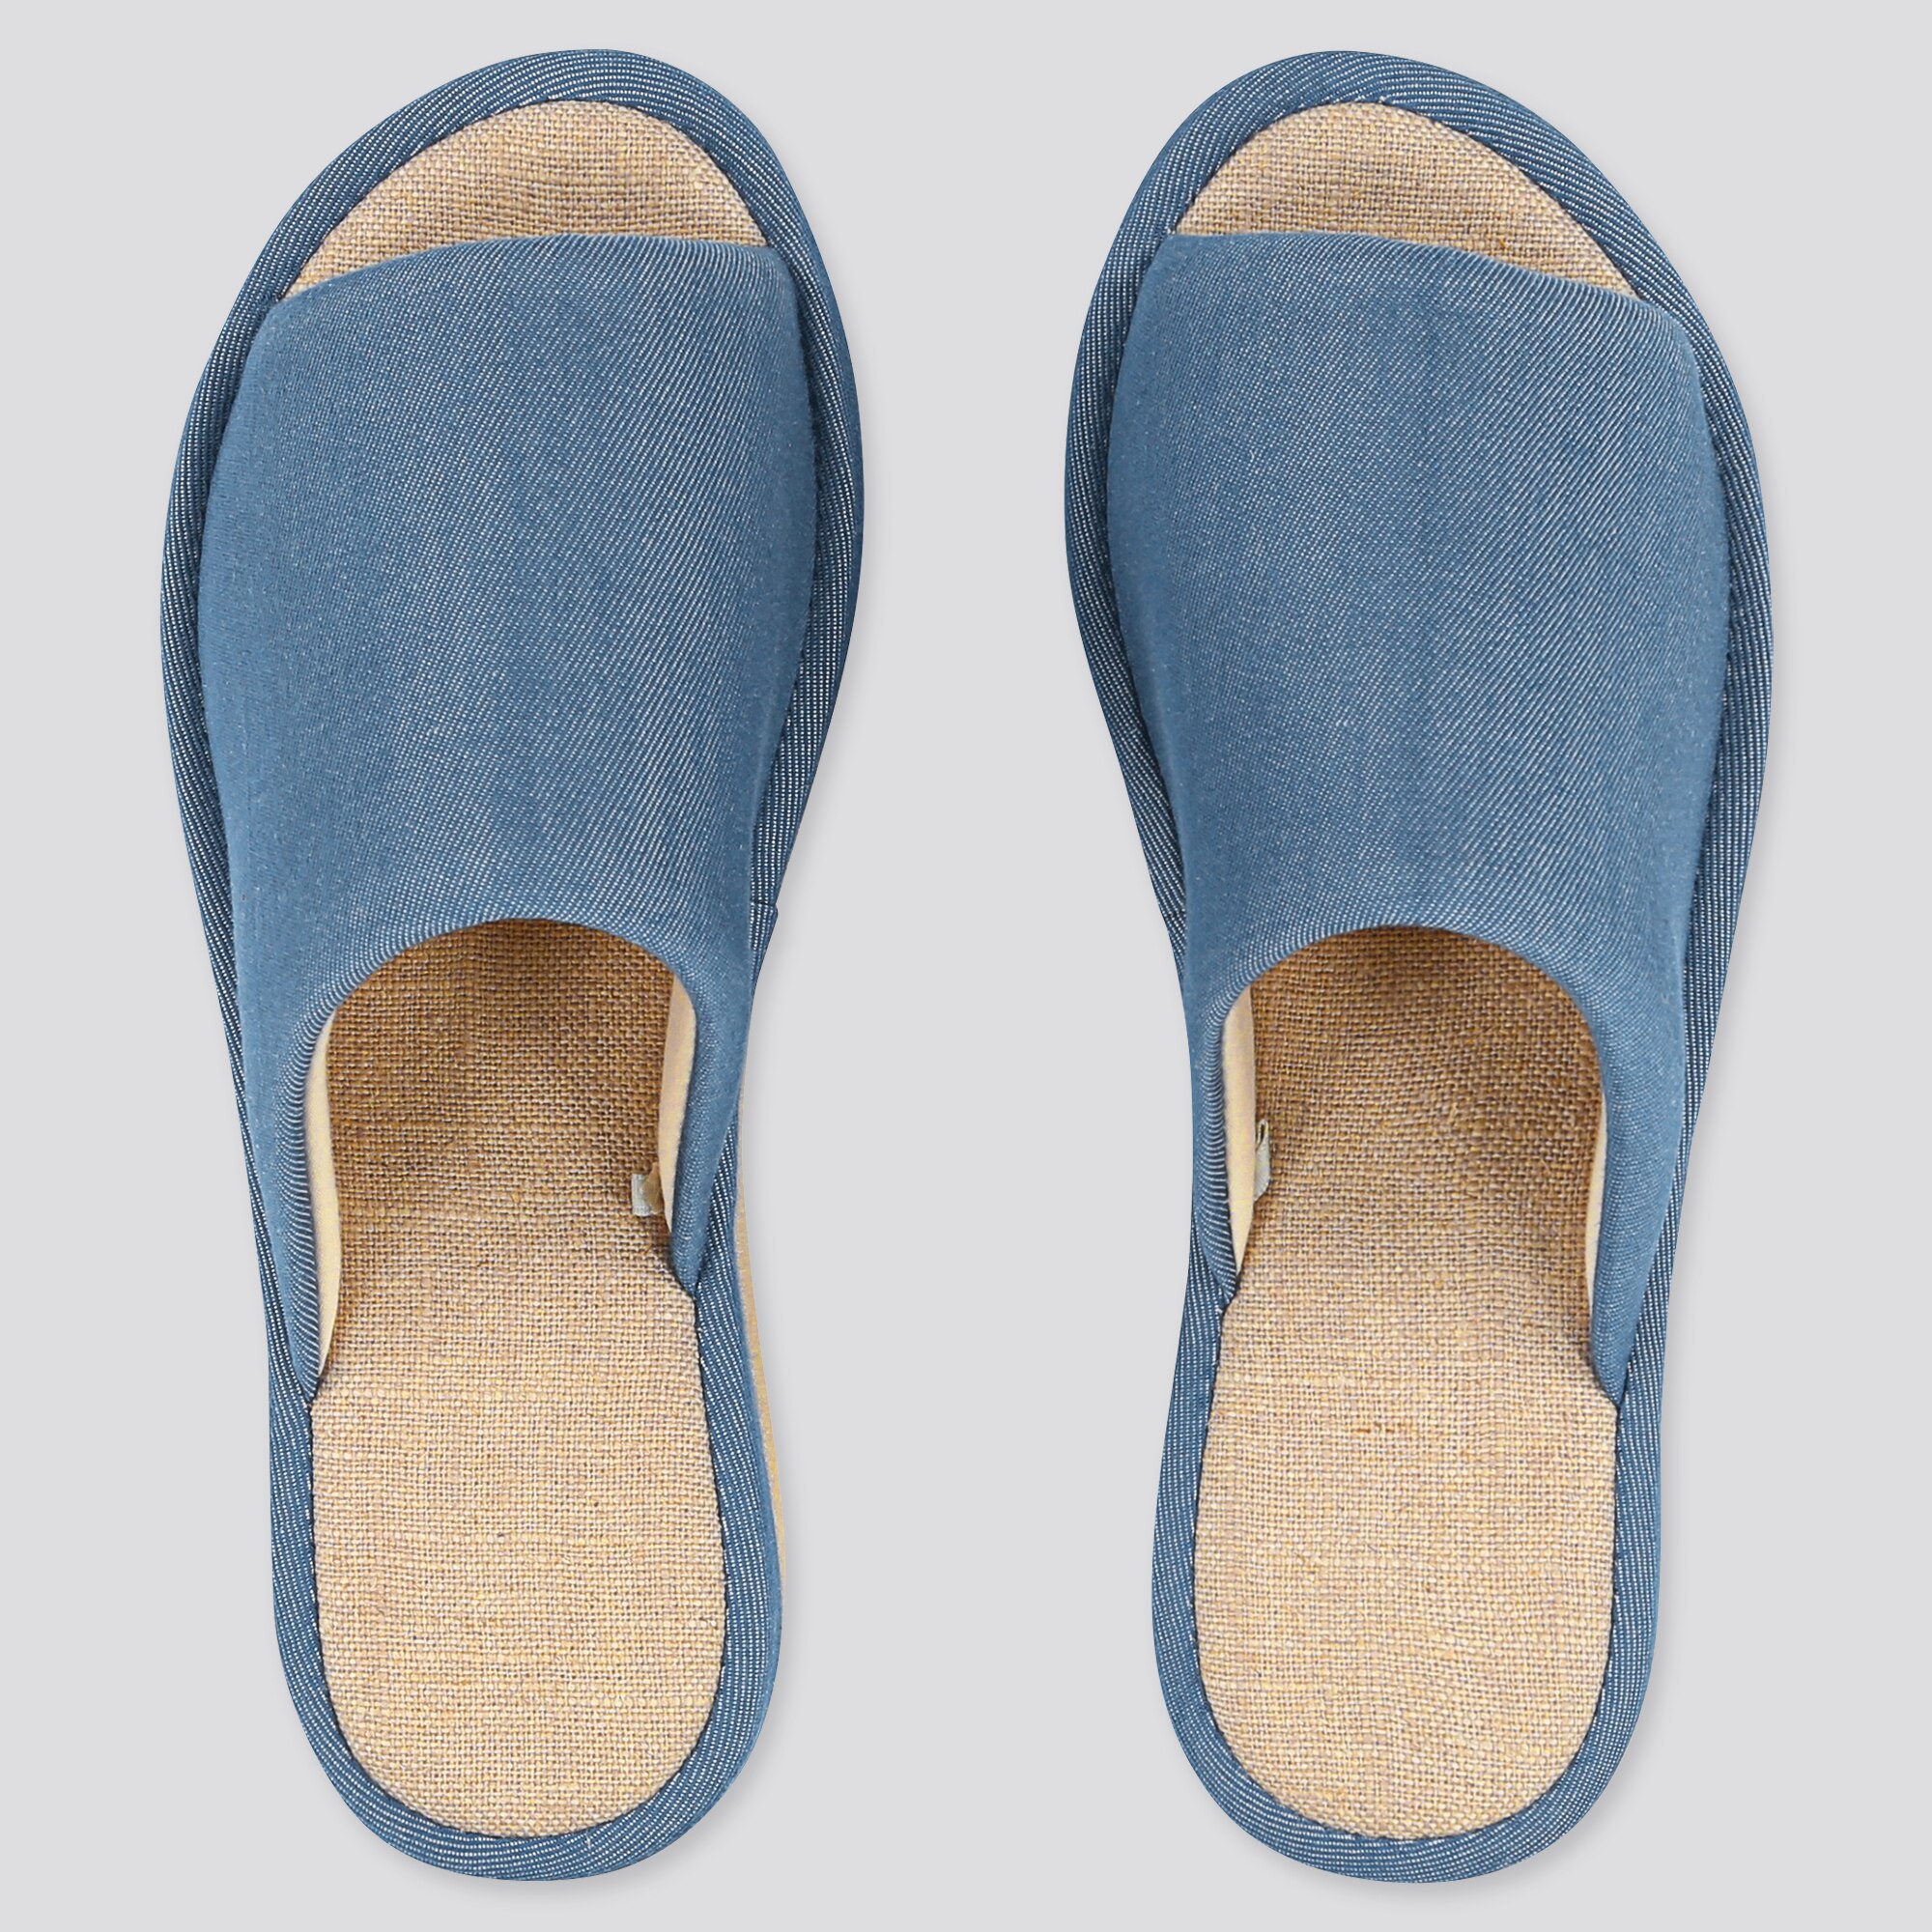 CHAMBRAY SLIPPERS | UNIQLO US